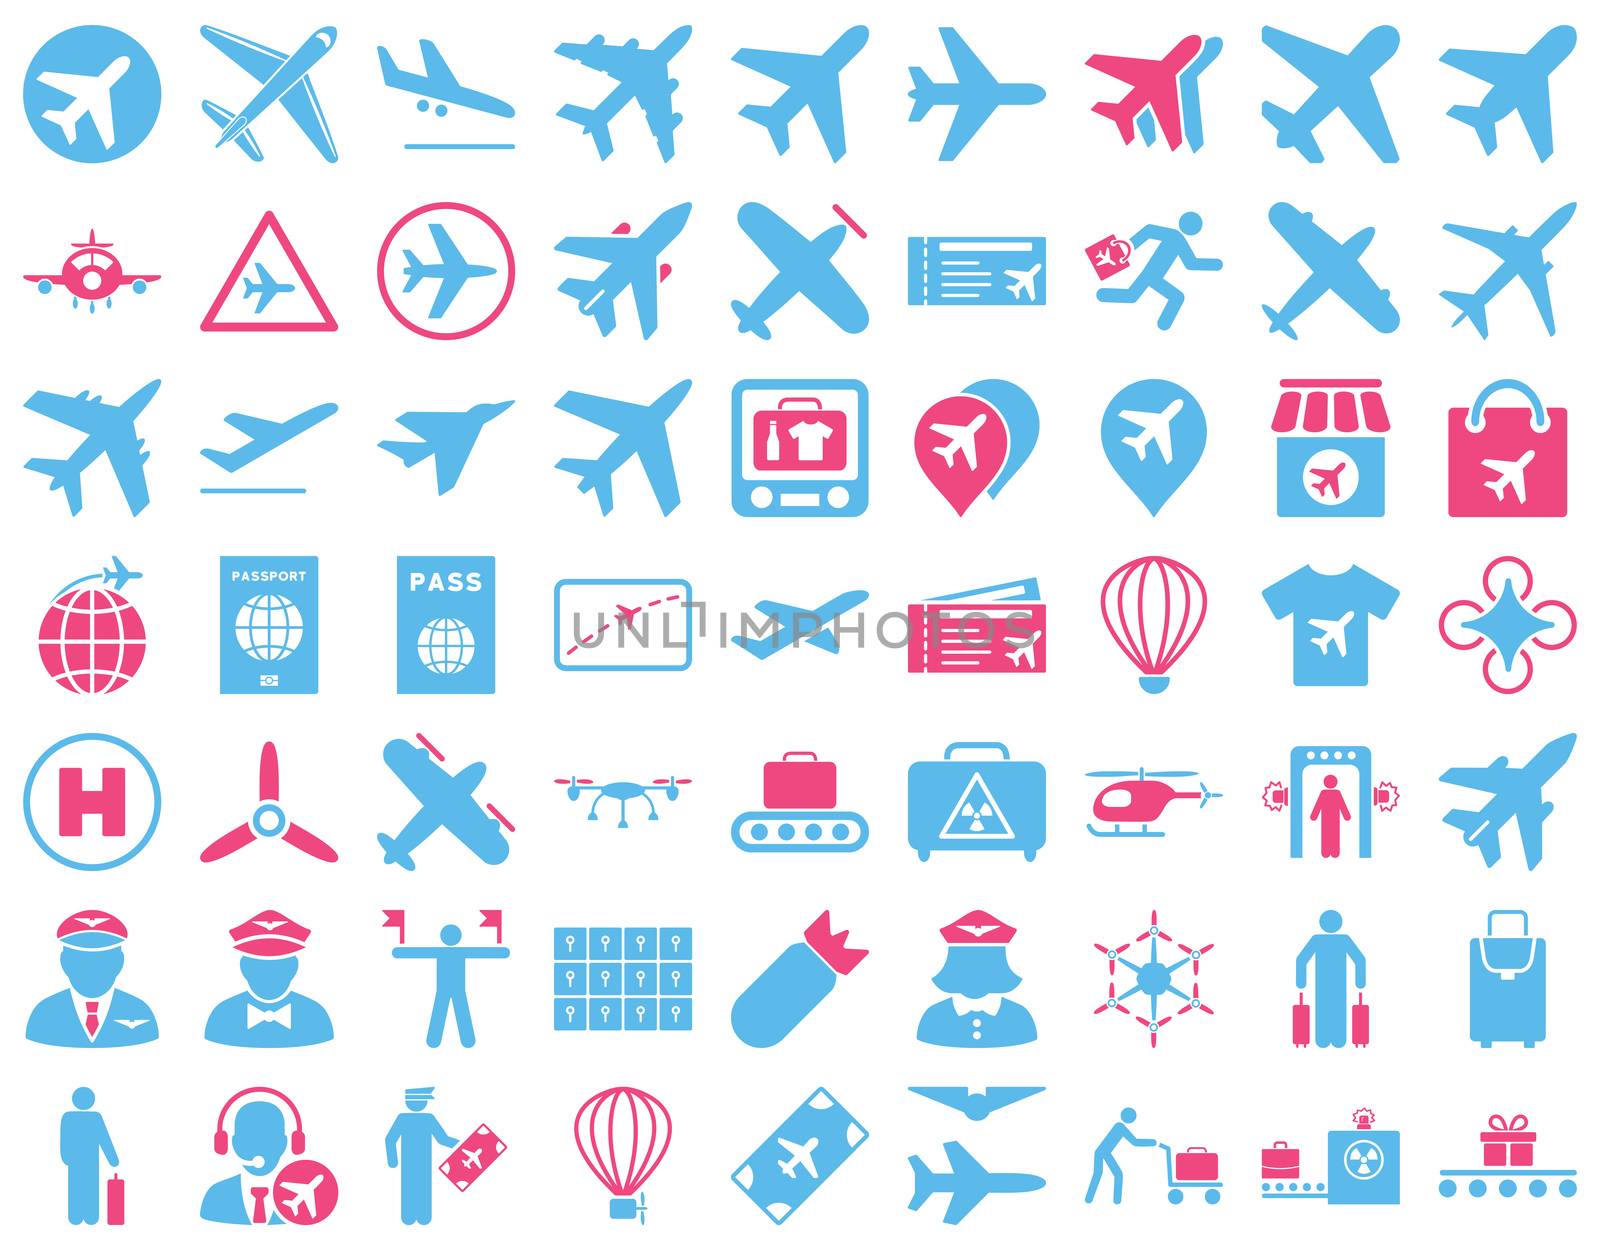 Aviation Icon Set. These flat bicolor icons use pink and blue colors. Raster images are isolated on a white background.